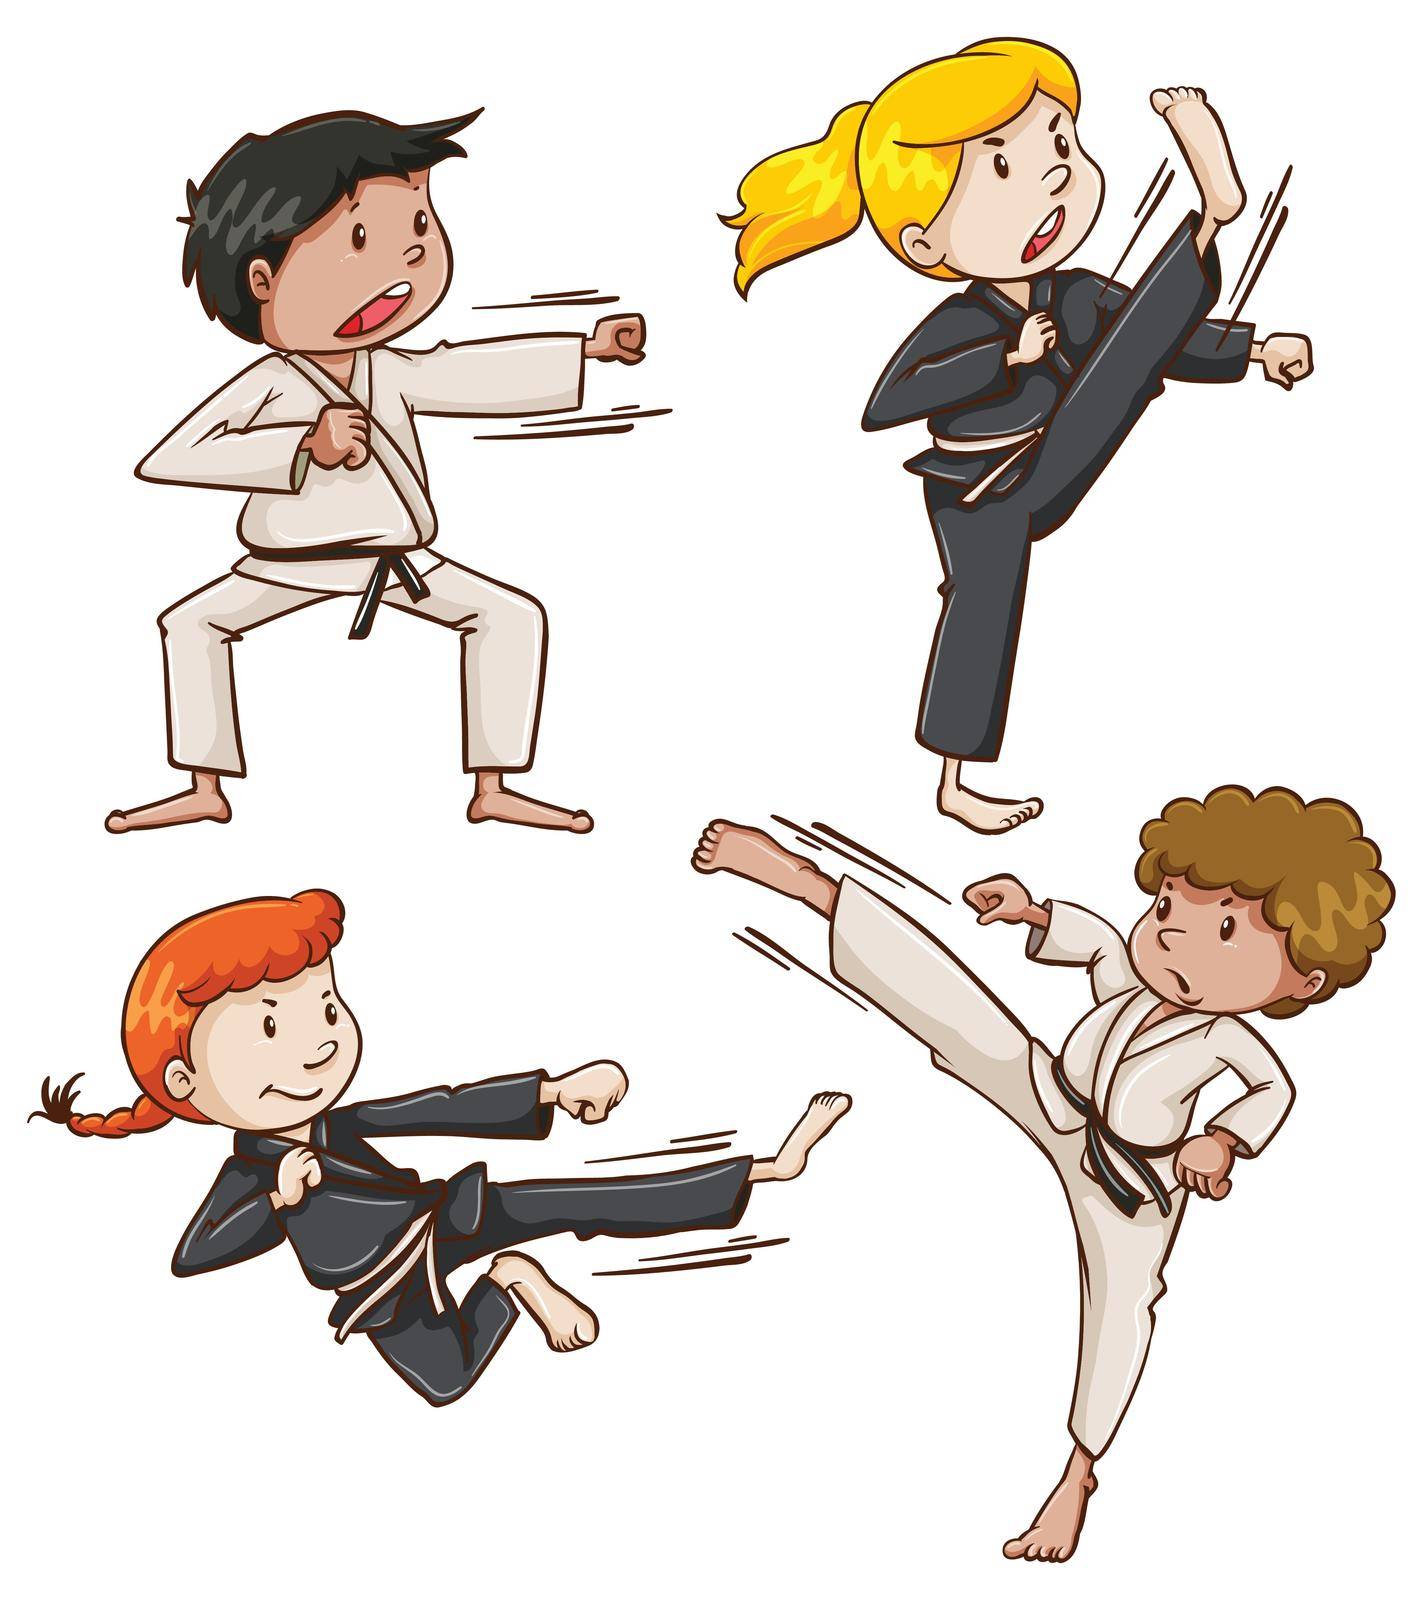 Illustration of the simple sketch of people engaging in martial arts on a white background